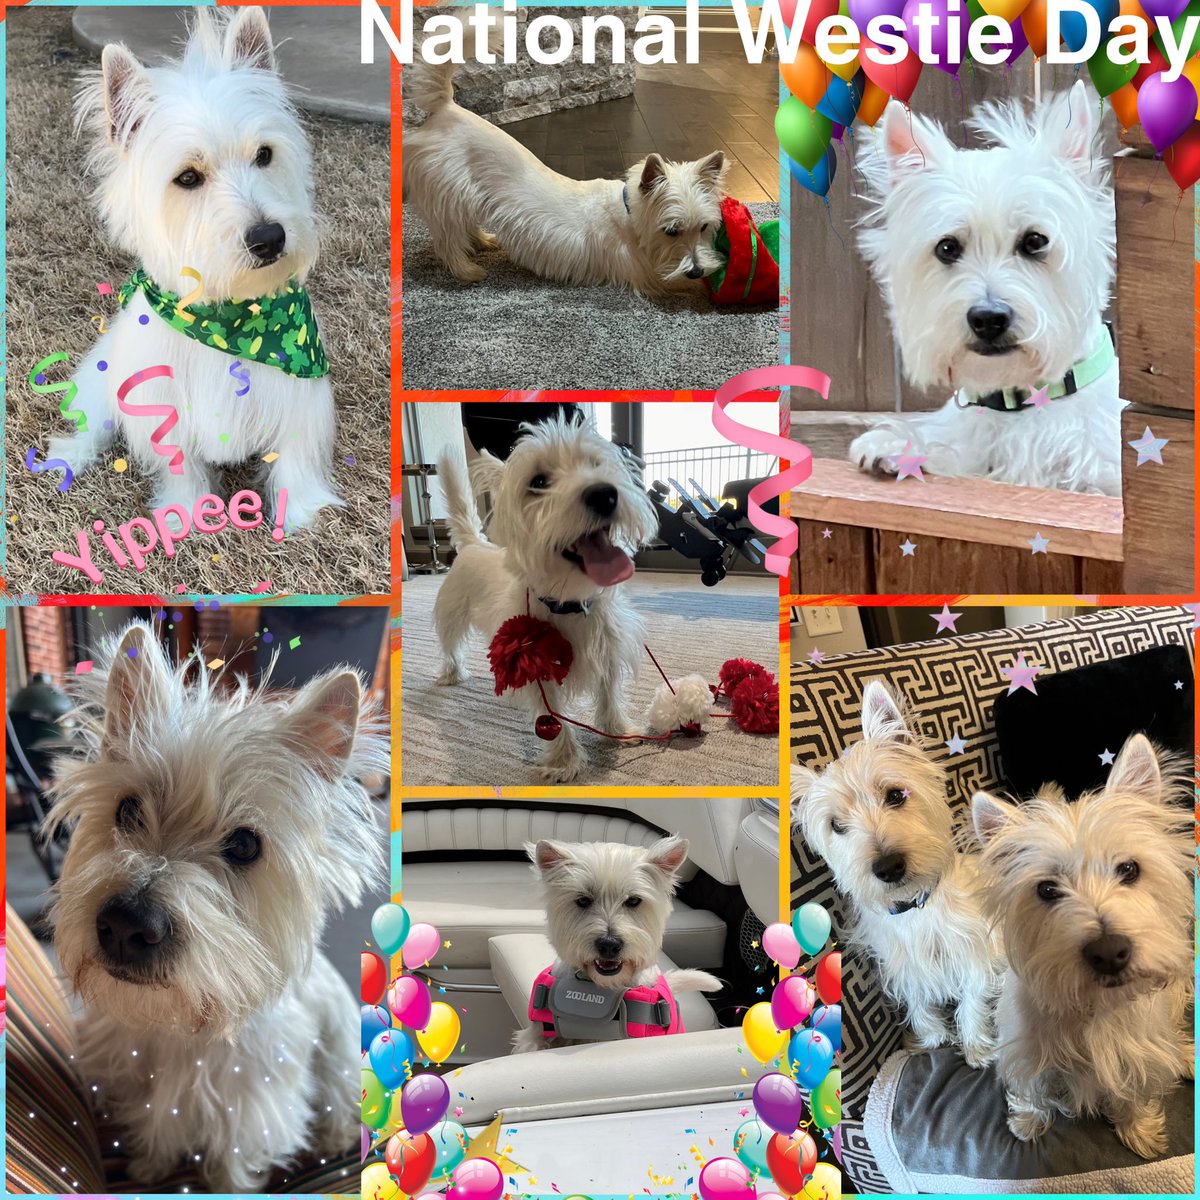 It’s #NationalWestieDay! 🐾🐾🎉🎉 Break out the bones! Grab the leashes! Get those pupcups ready! It’s OUR day! Wheeee!! 🎉🎉🐾🐾